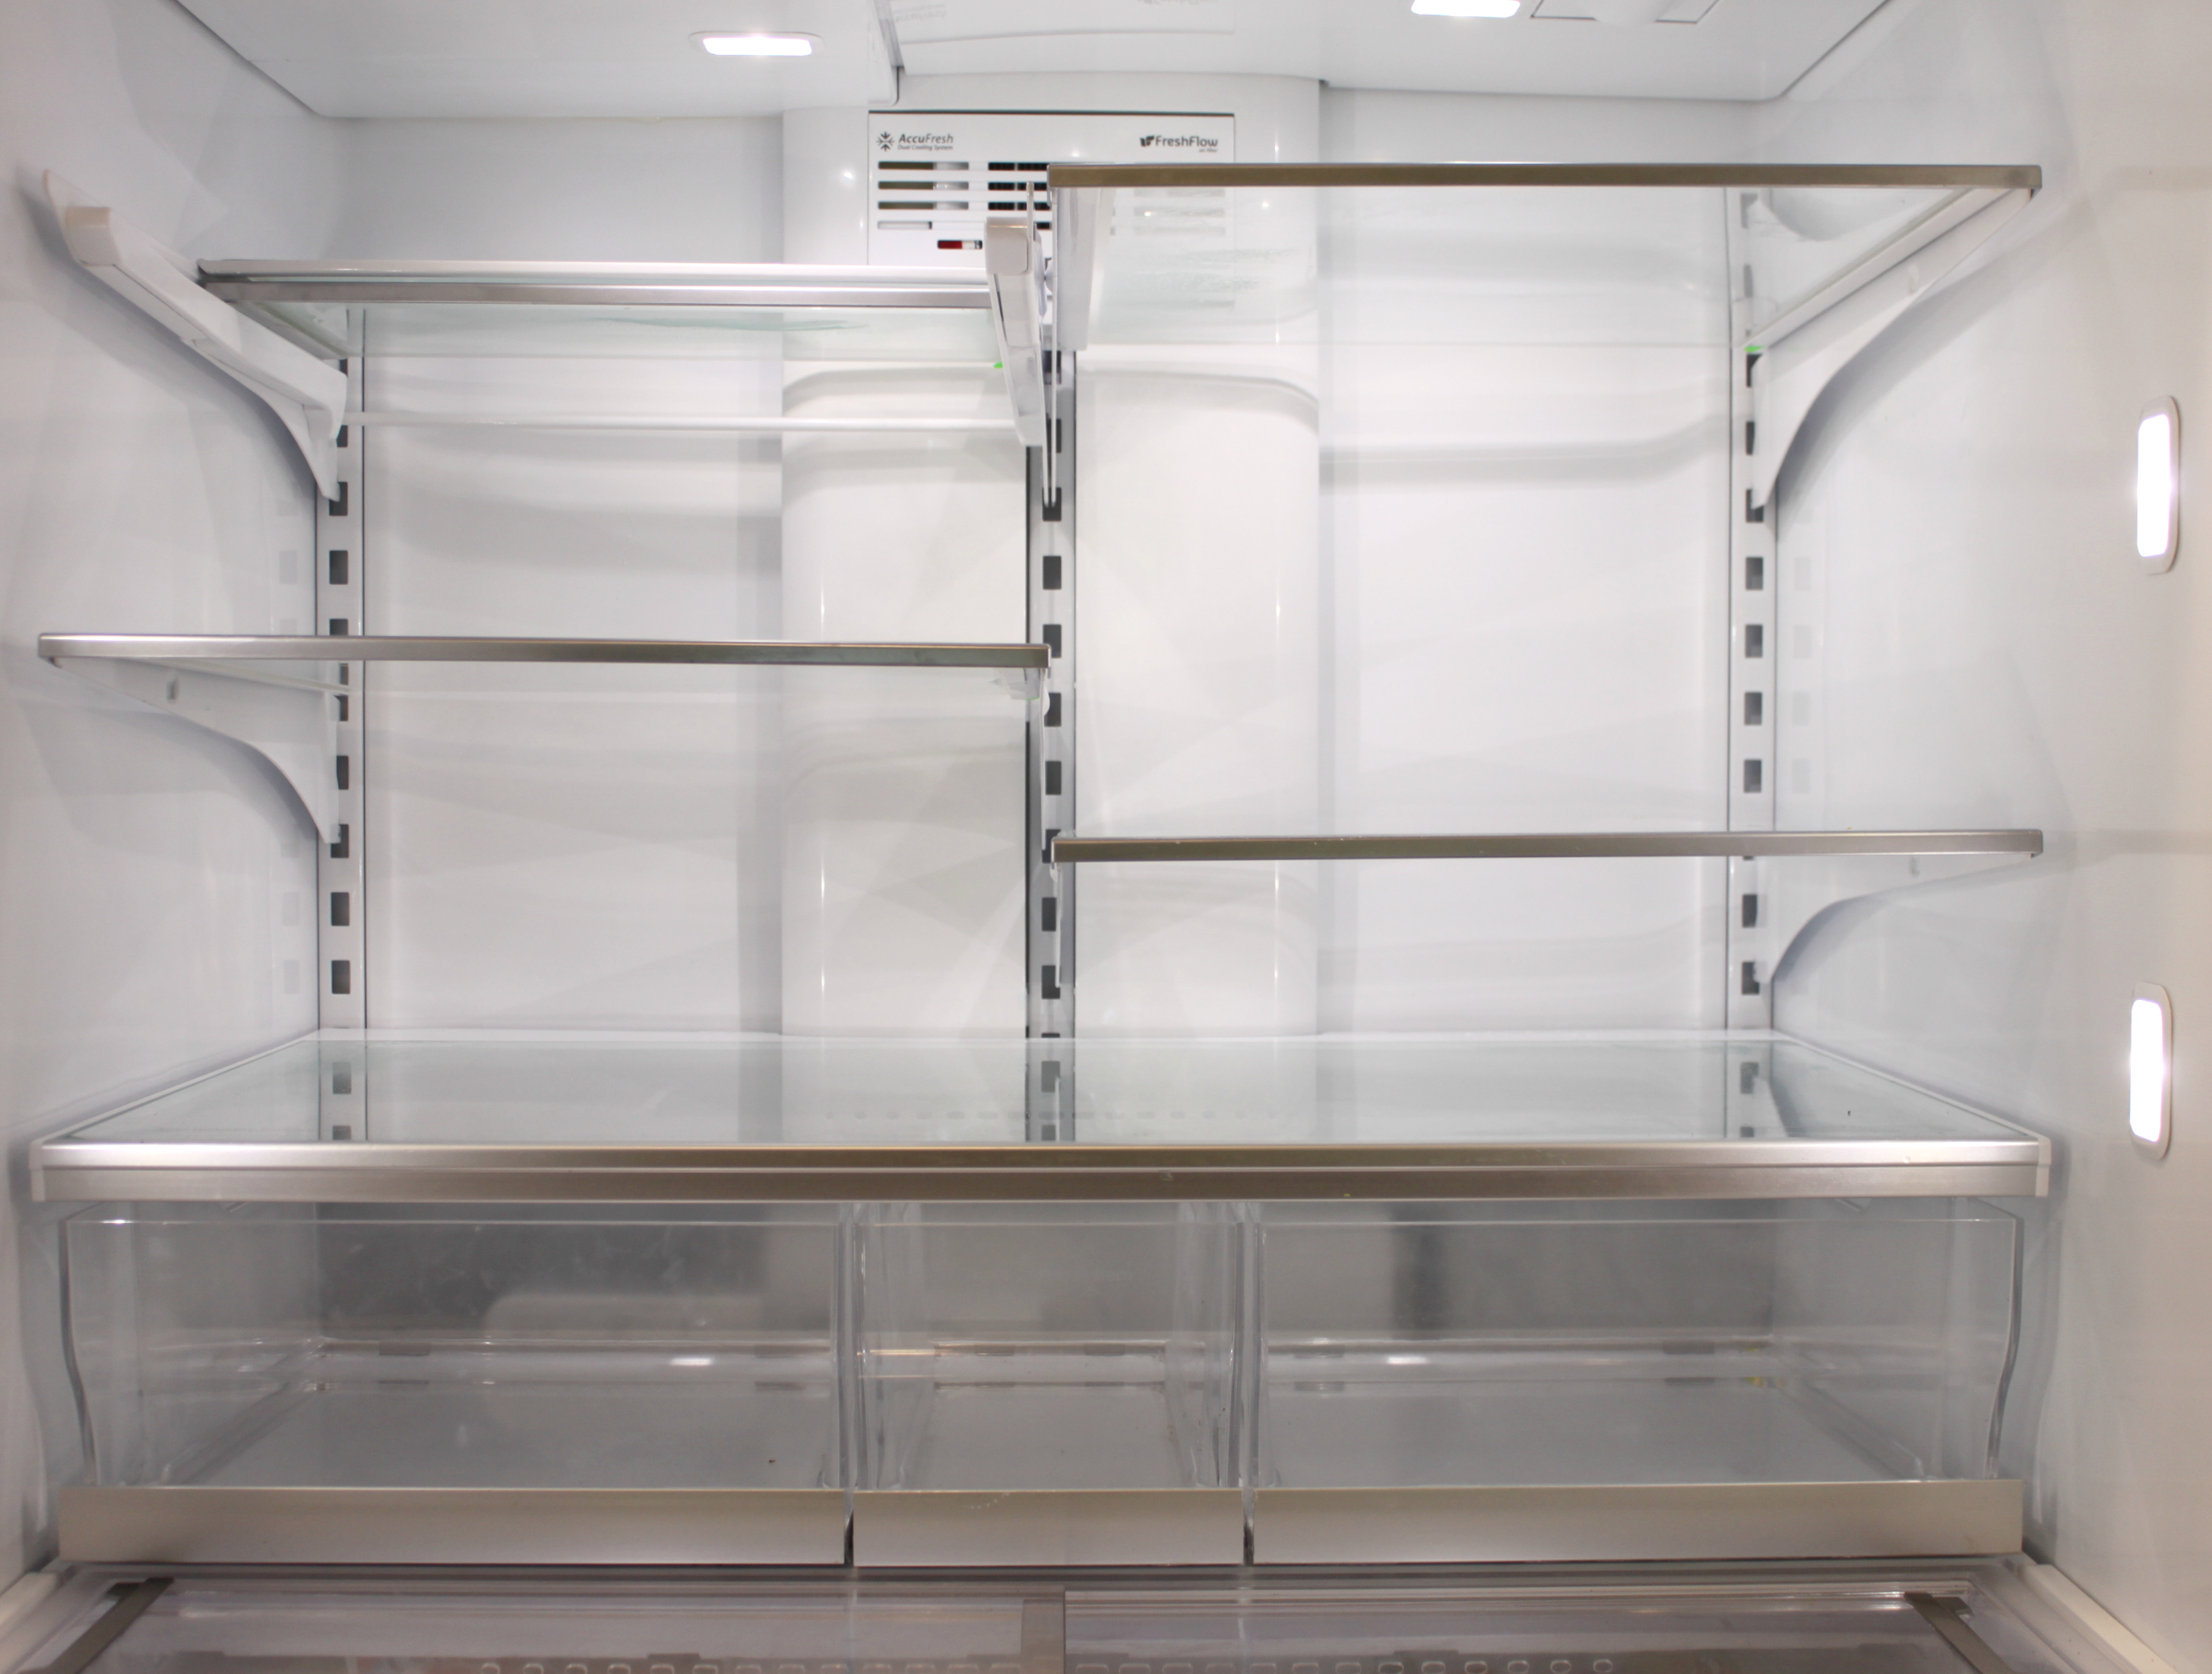 A Brilliantly Organized Fridge with Rubbermaid® BRILLIANCE™ | An Inspired Nest